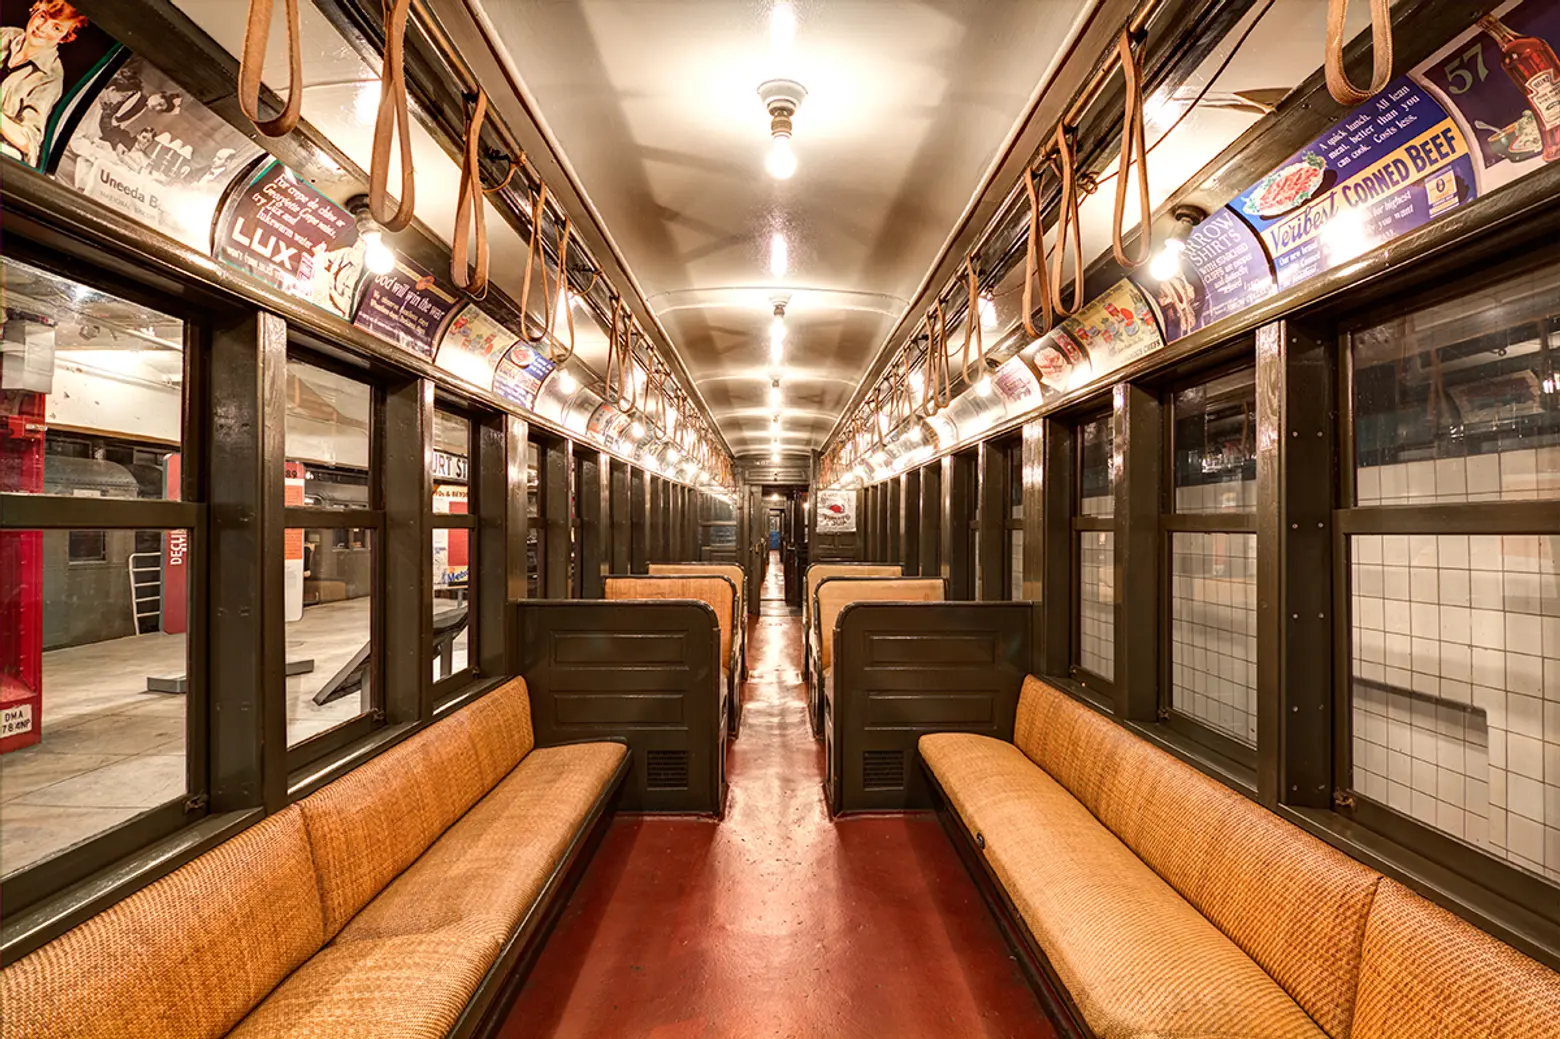 NYC BRT, New York Transit Museum, vintage subway cars, Brooklyn museums, history of NYC subway